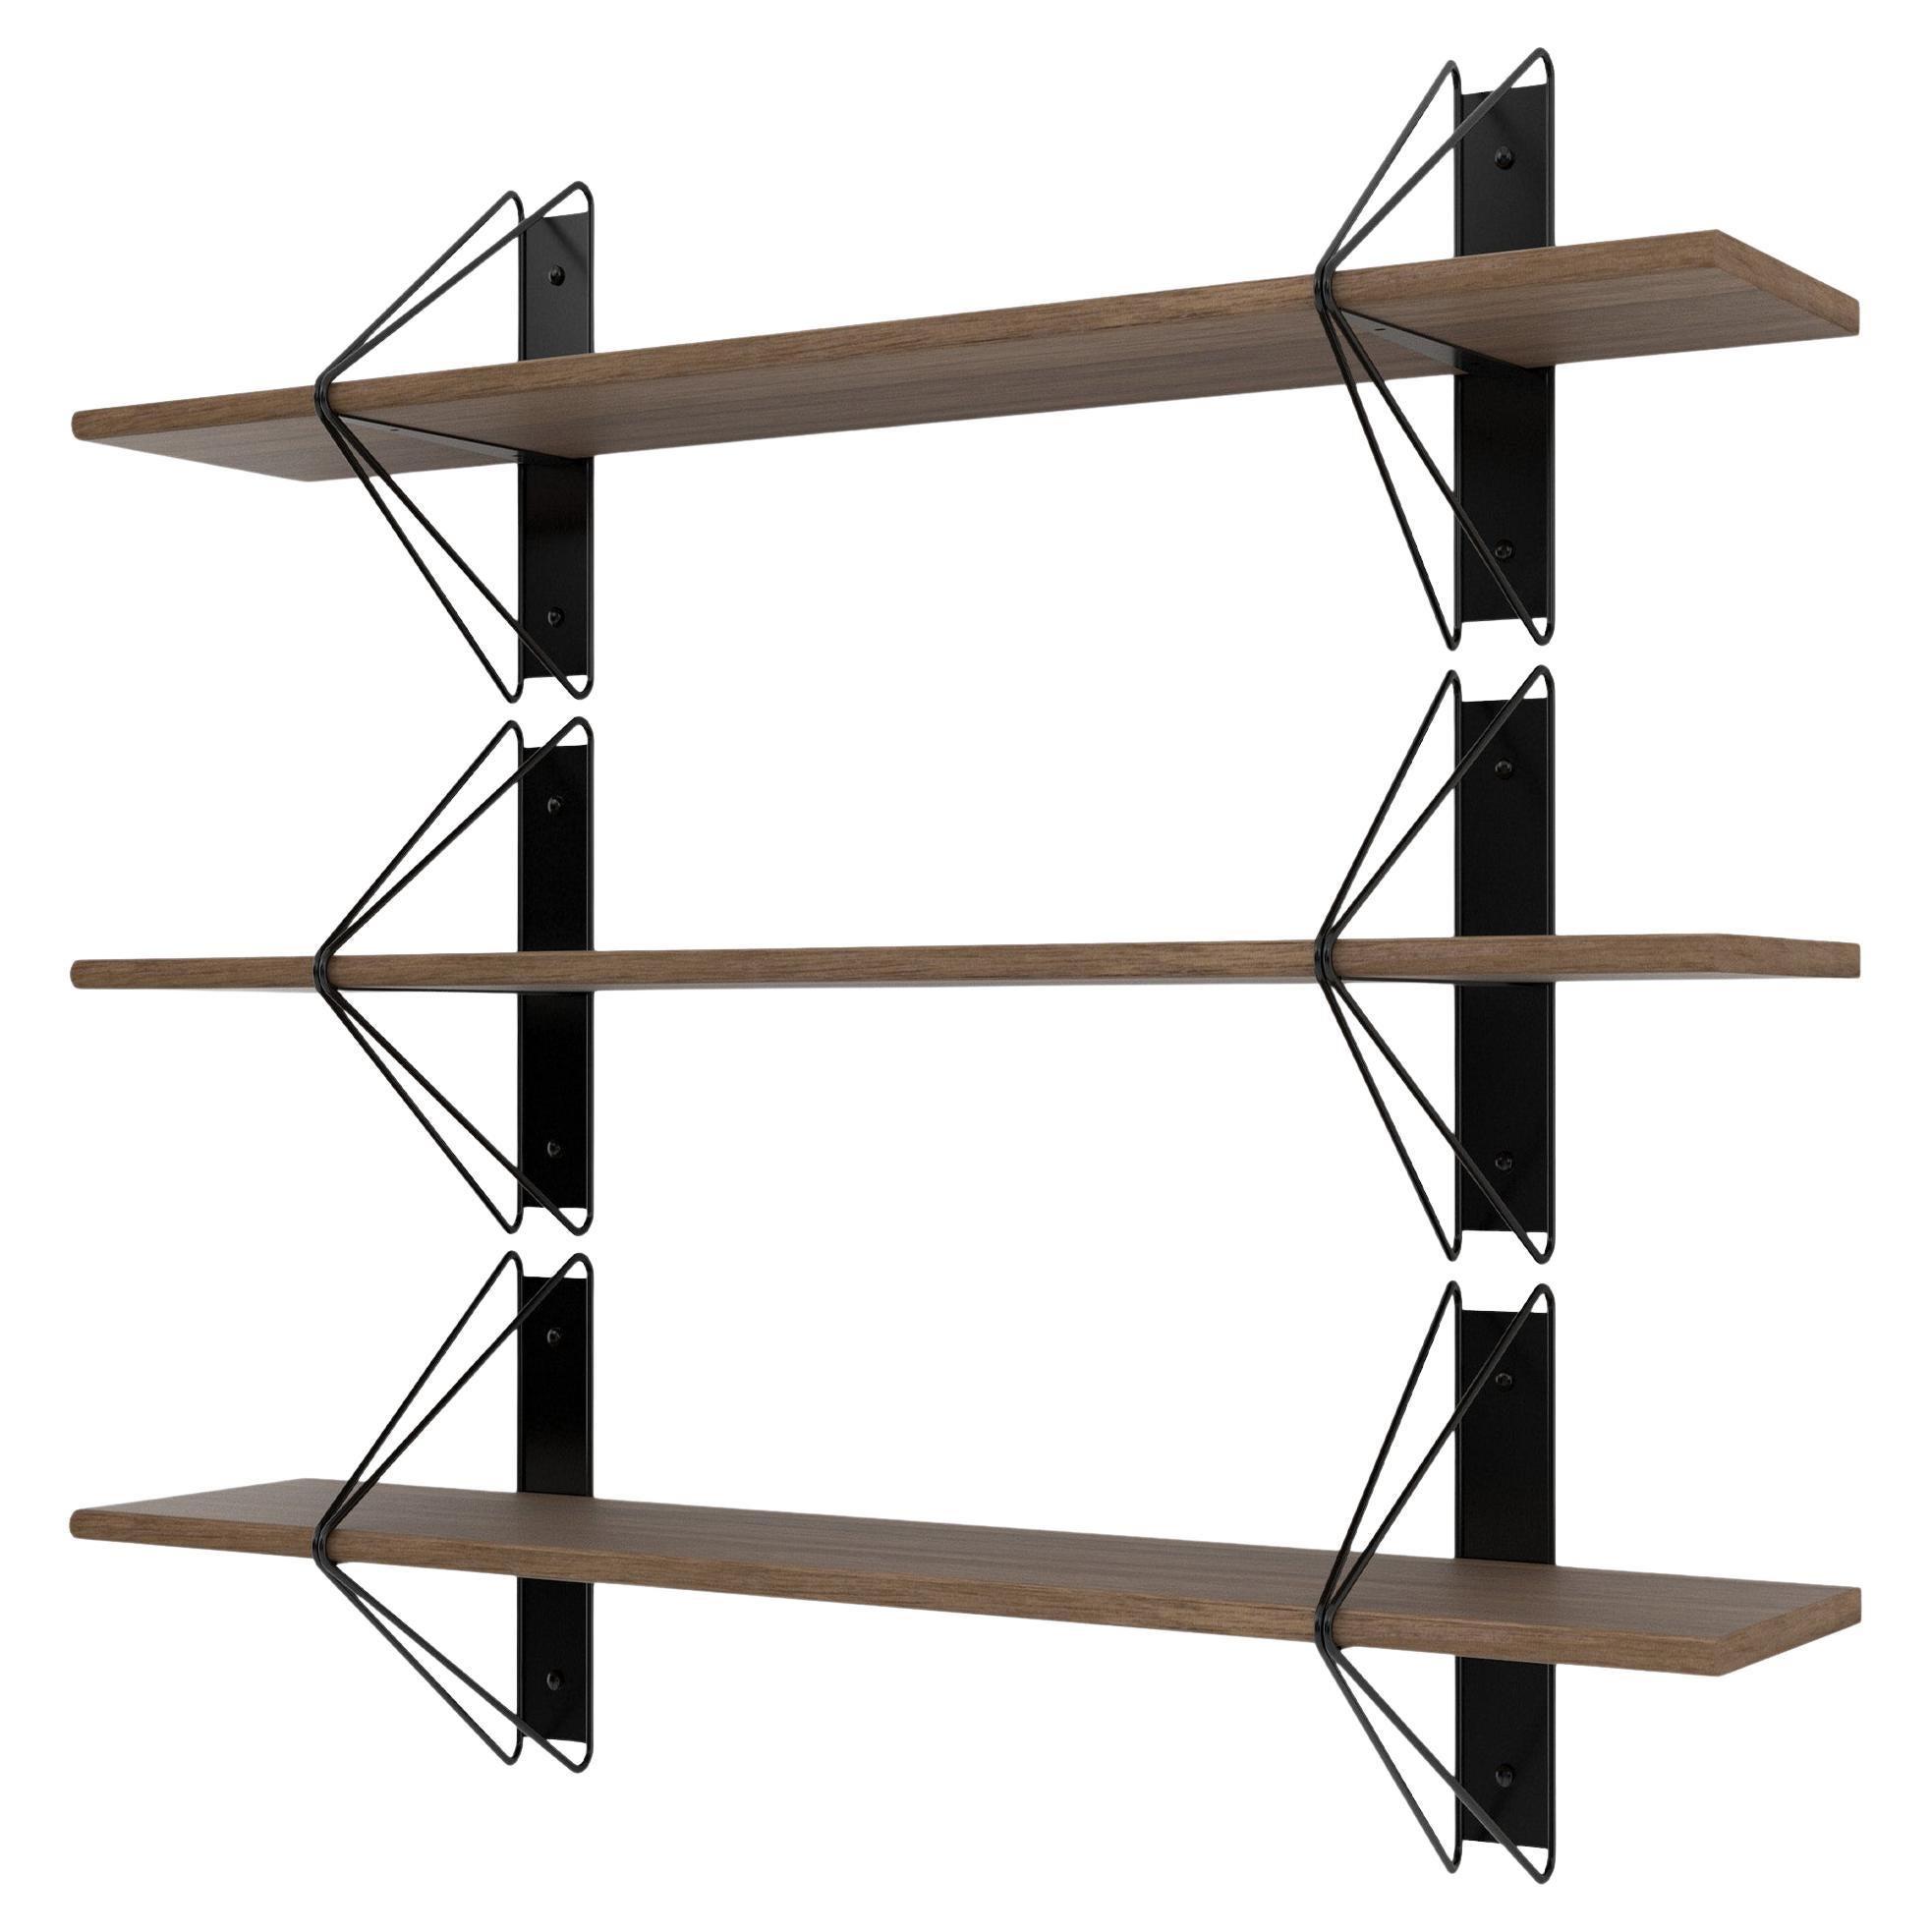 Set of 3 Strut Shelves from Souda, 52in, Black and Walnut, Made to Order